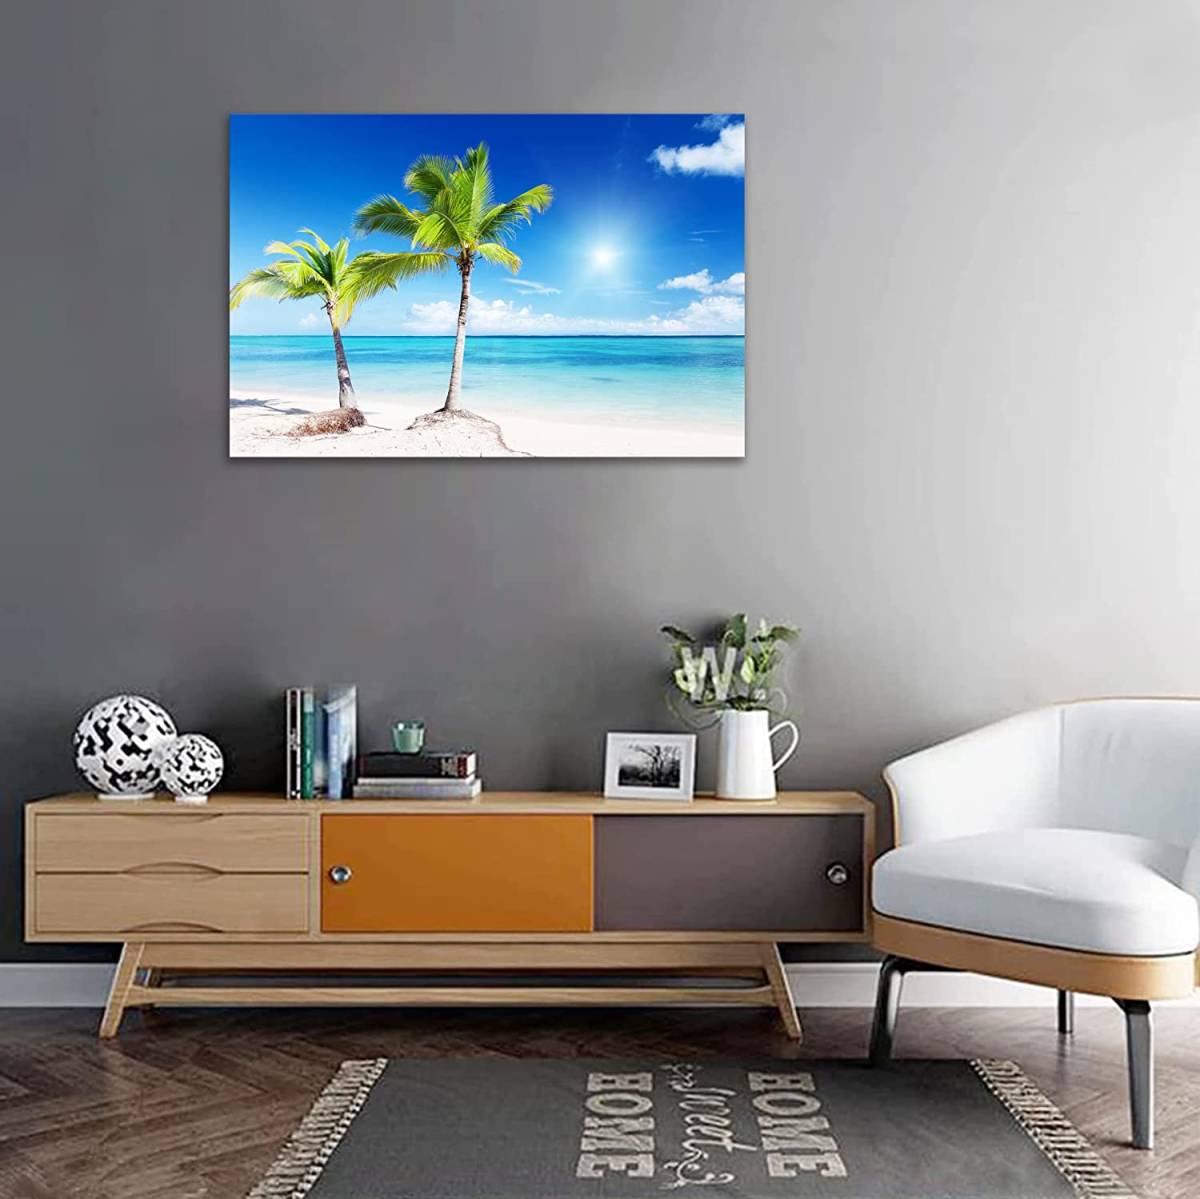  blue sea art panel nature scenery tree frame art picture installation easiness light weight Inte rear living part shop decoration cocos nucifera. tree 